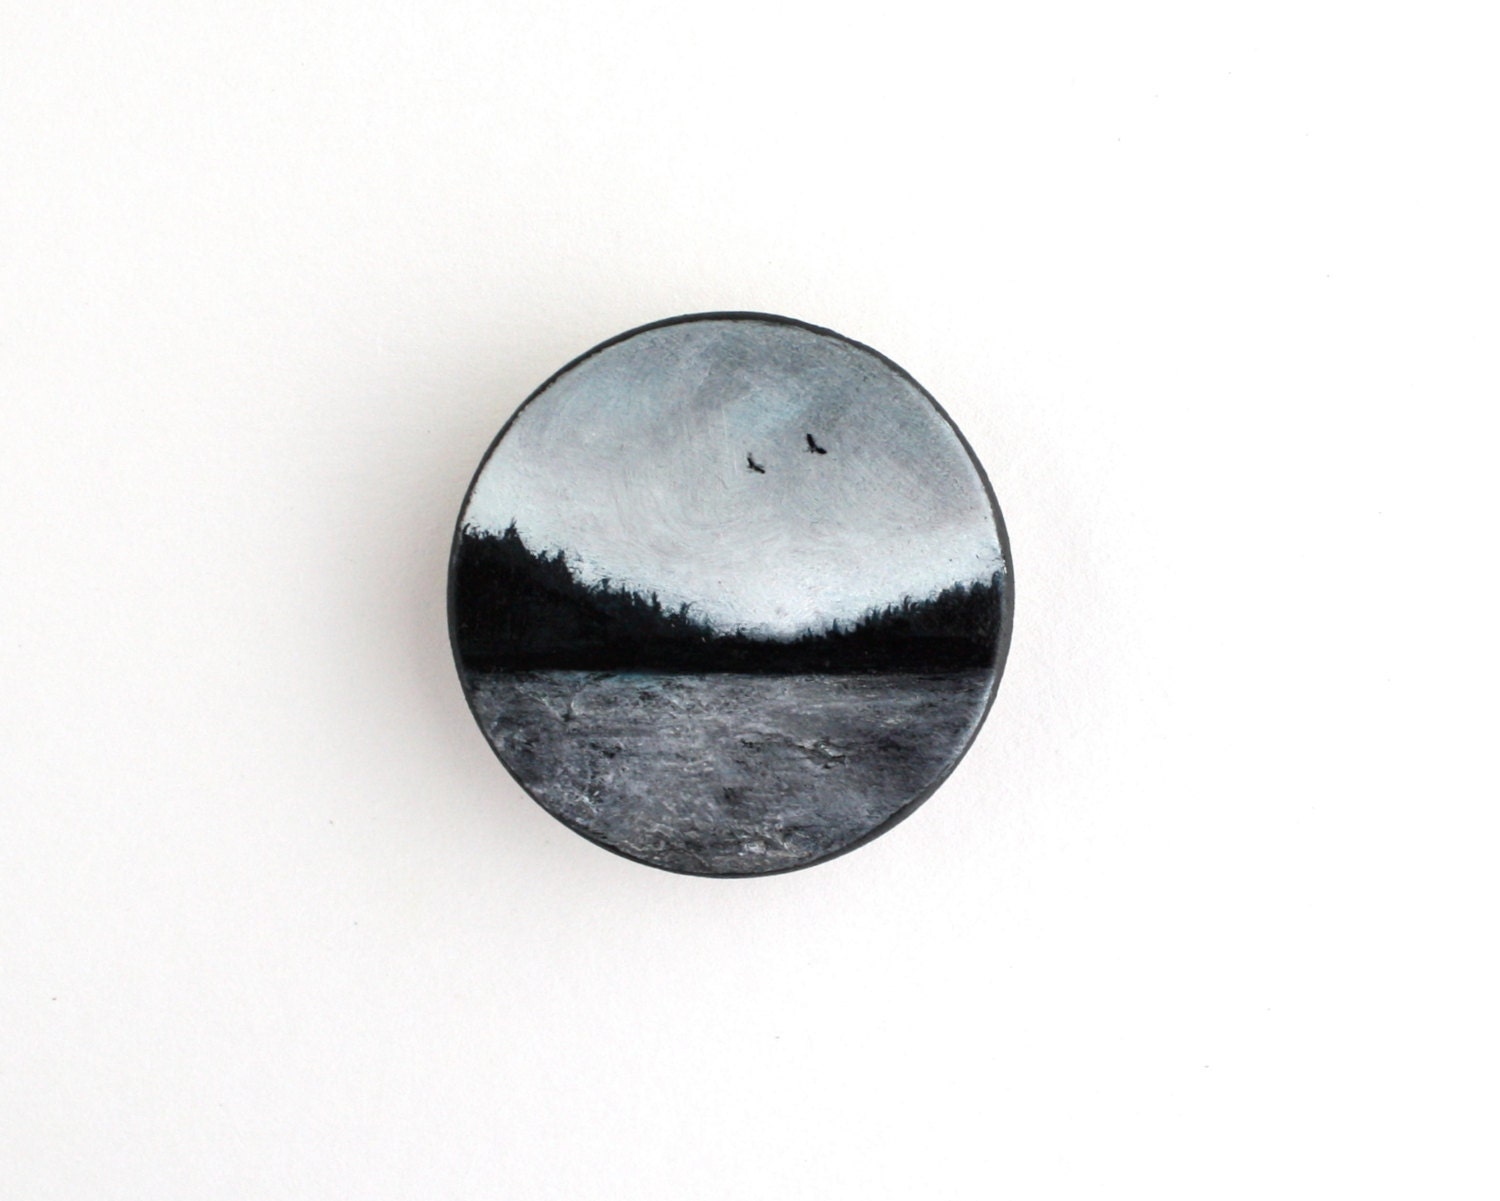 SALE - 20% off - Black and White Landscape Magnet Oil Painting - TreeHollowDesigns